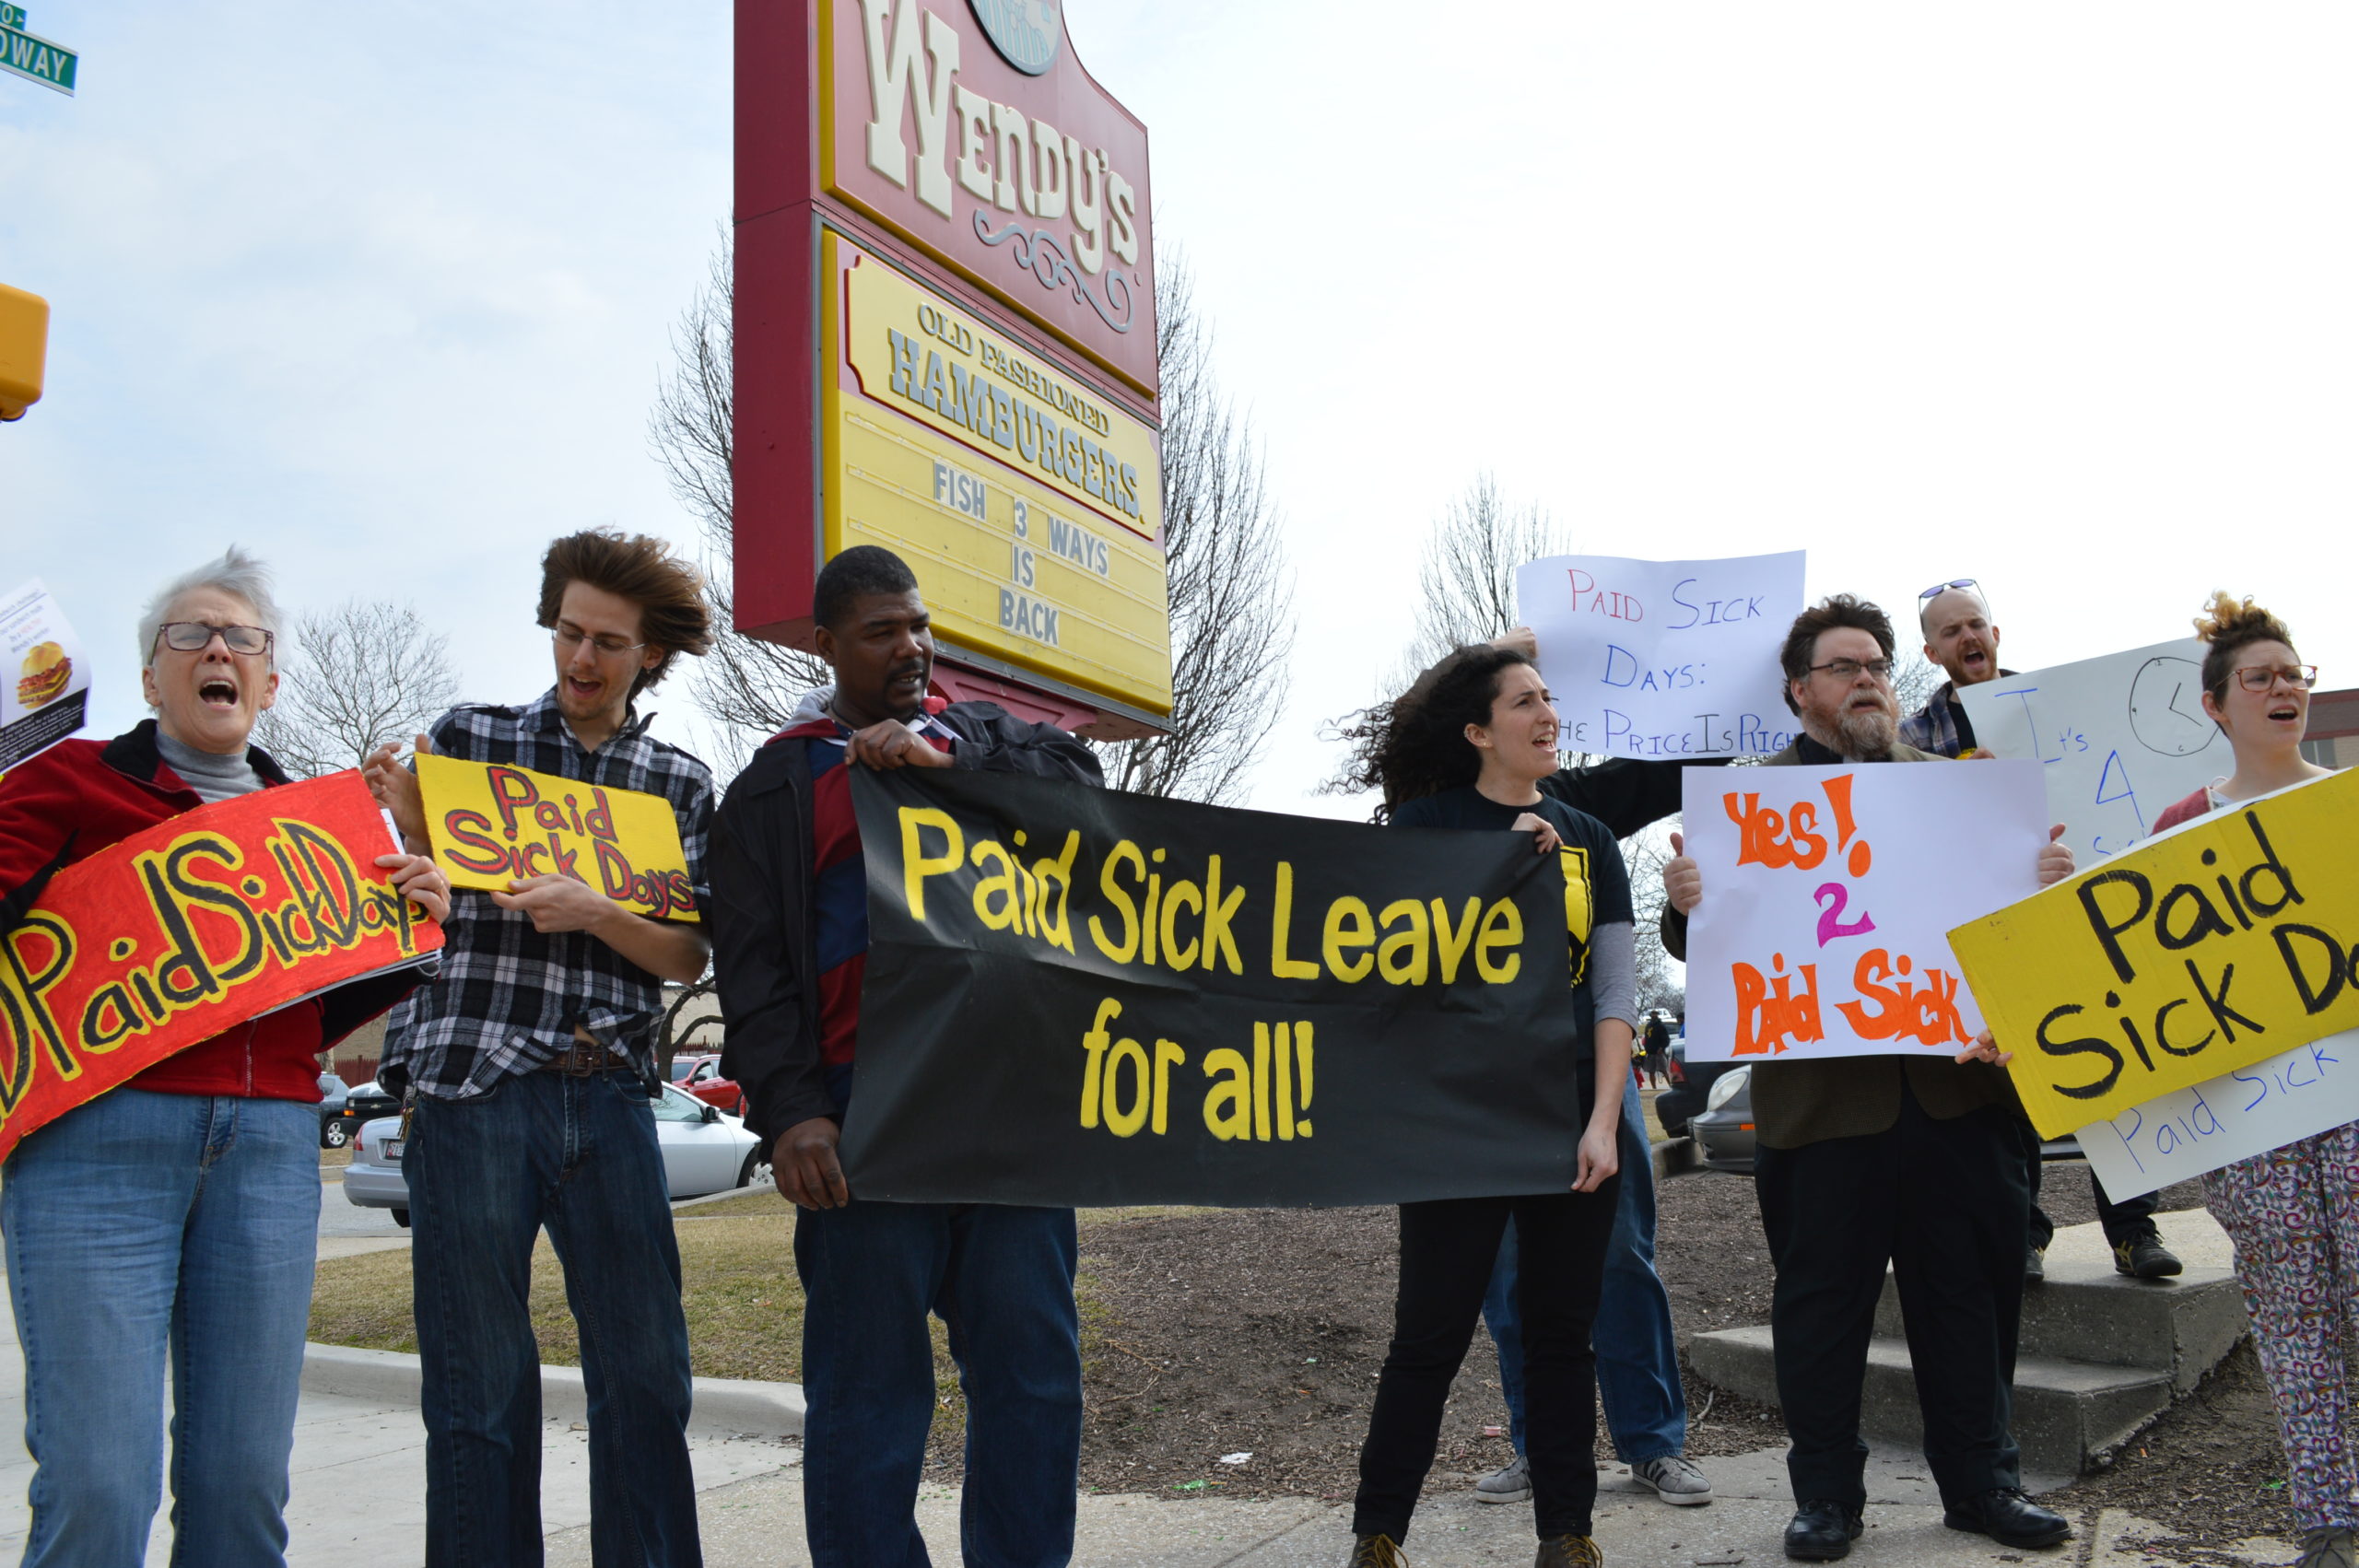 FOOD WORKERS ON THE FRONT LINE OF PUBLIC HEALTH CRISIS NEED URGENT PROTECTIONS